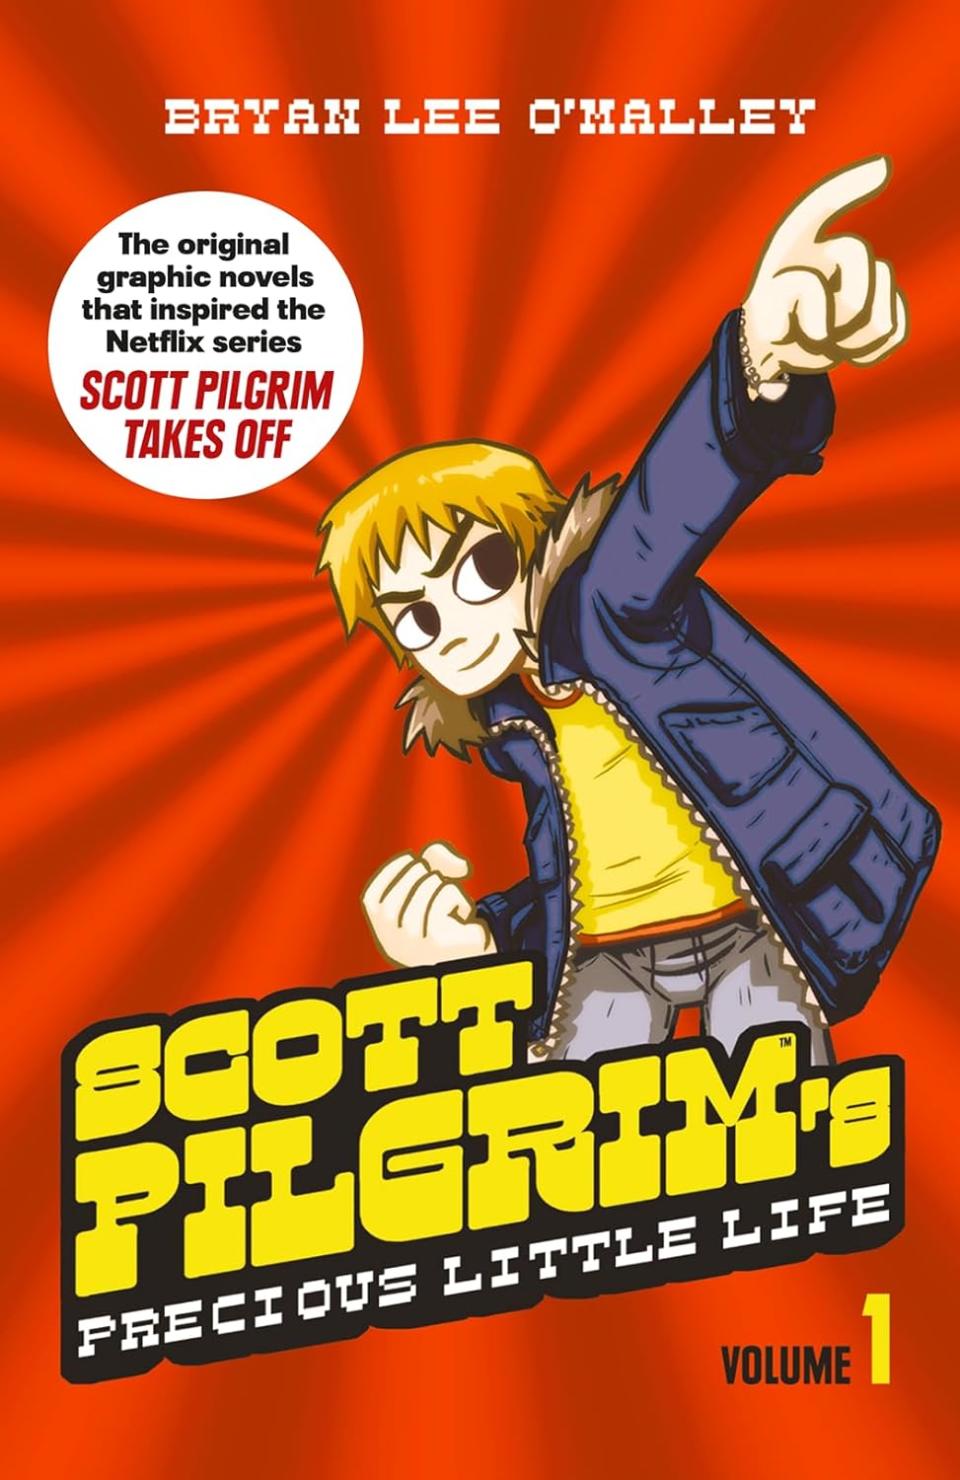 "Scott Pilgrim's Precious Little Life: Volume 1," by Bryan Lee O'Malley, is available at That's Entertainment.